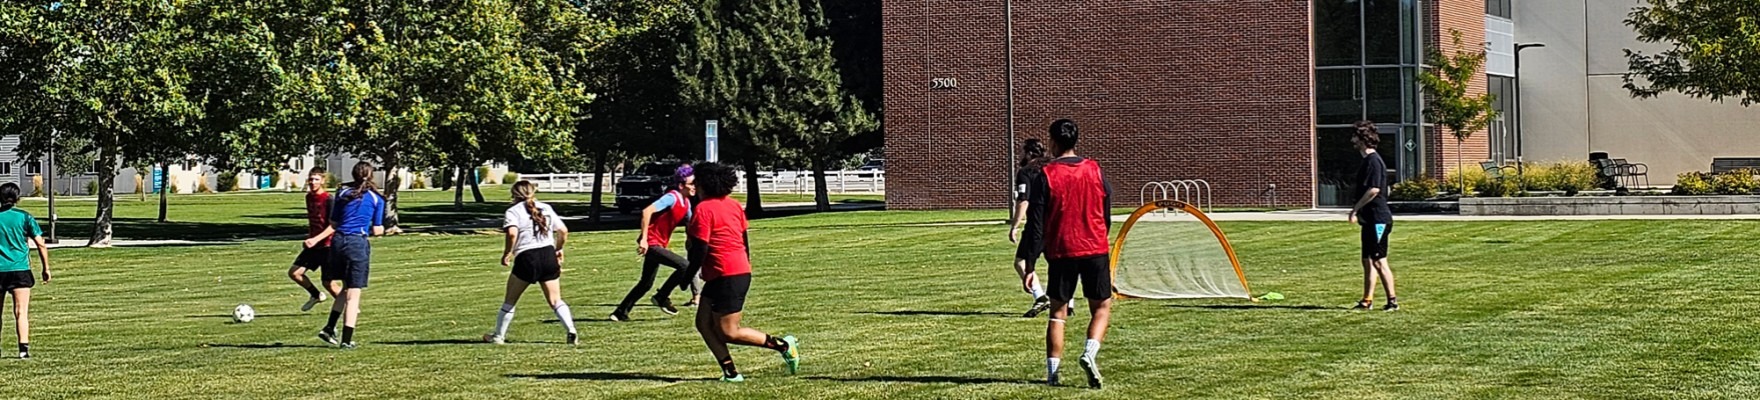 Club members playing soccer outside of the Nampa Campus Academic Building